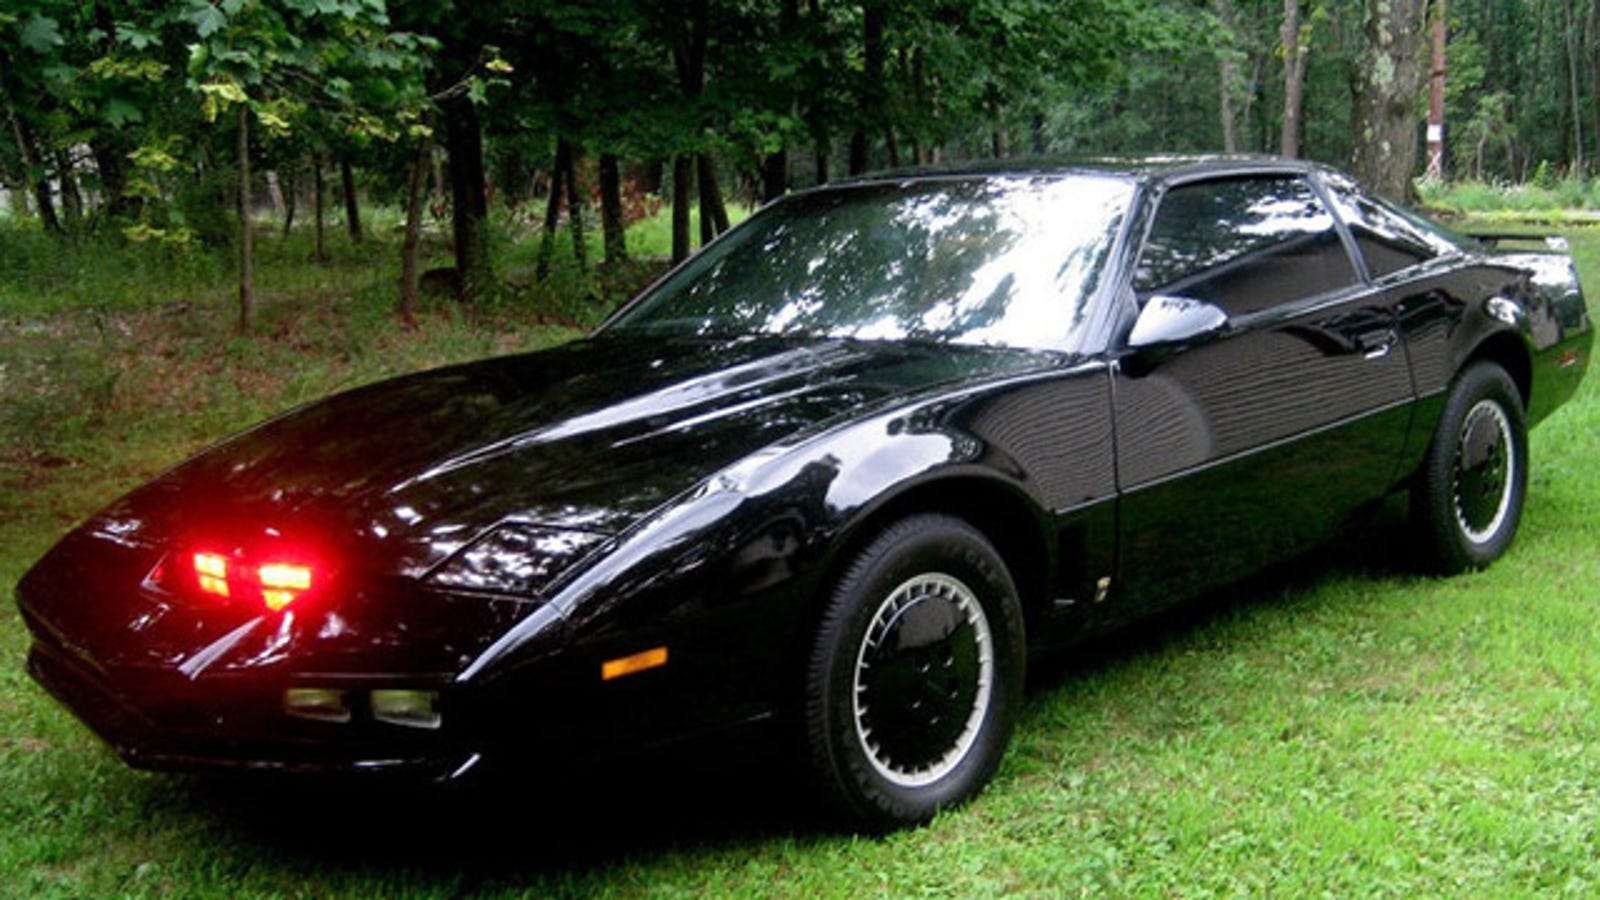 Original K.I.T.T. from " Knight Rider"  goes up for auction